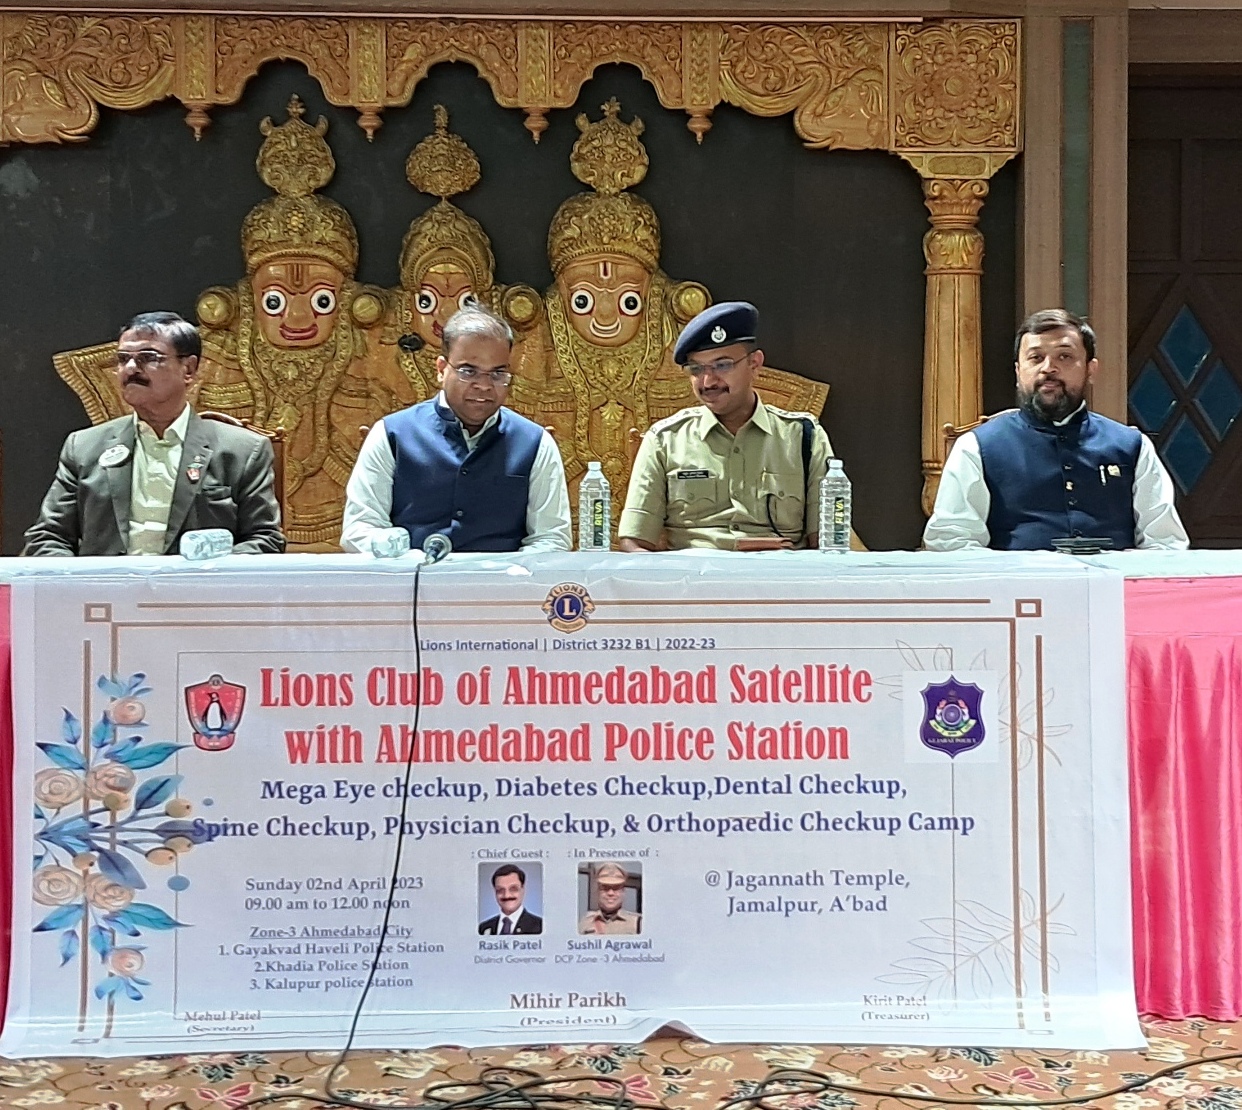 Lions Club of Ahmedabad Satellite organises health check-up camp for police personnel